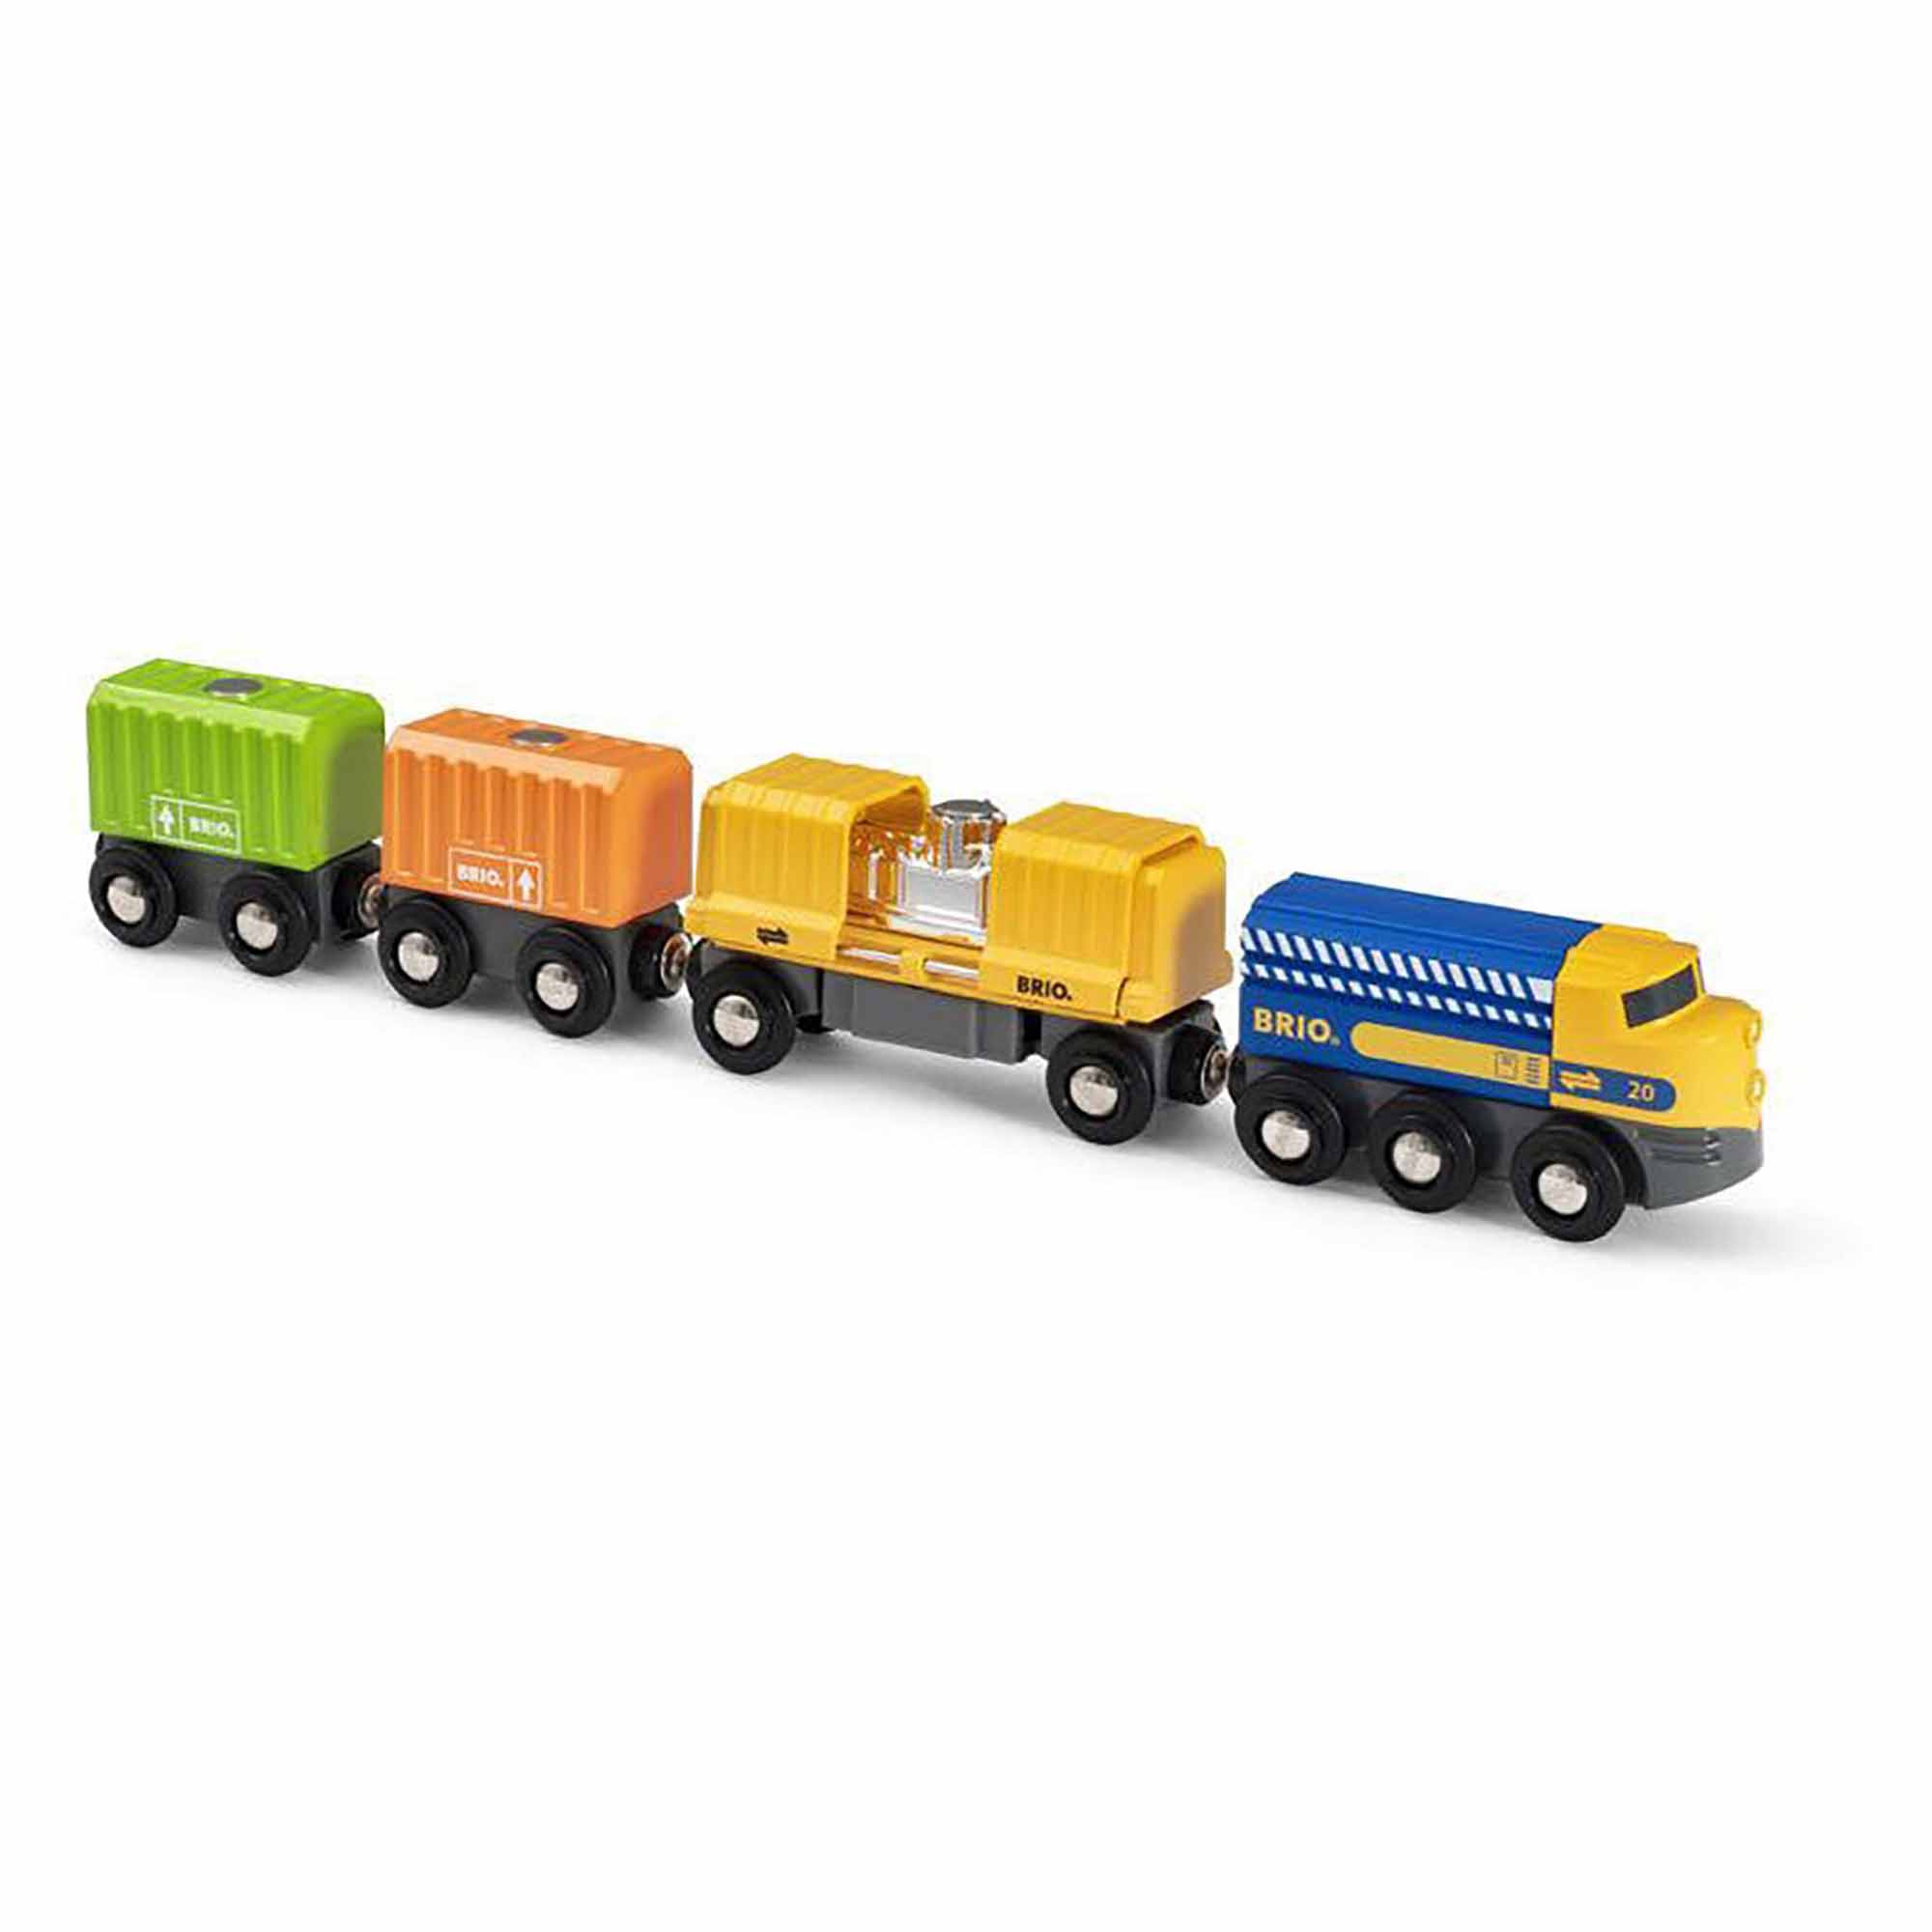 BRIO World - 33280 Freight Goods Station | Toy Train Accessories for Kids  Age 3 and Up , Green